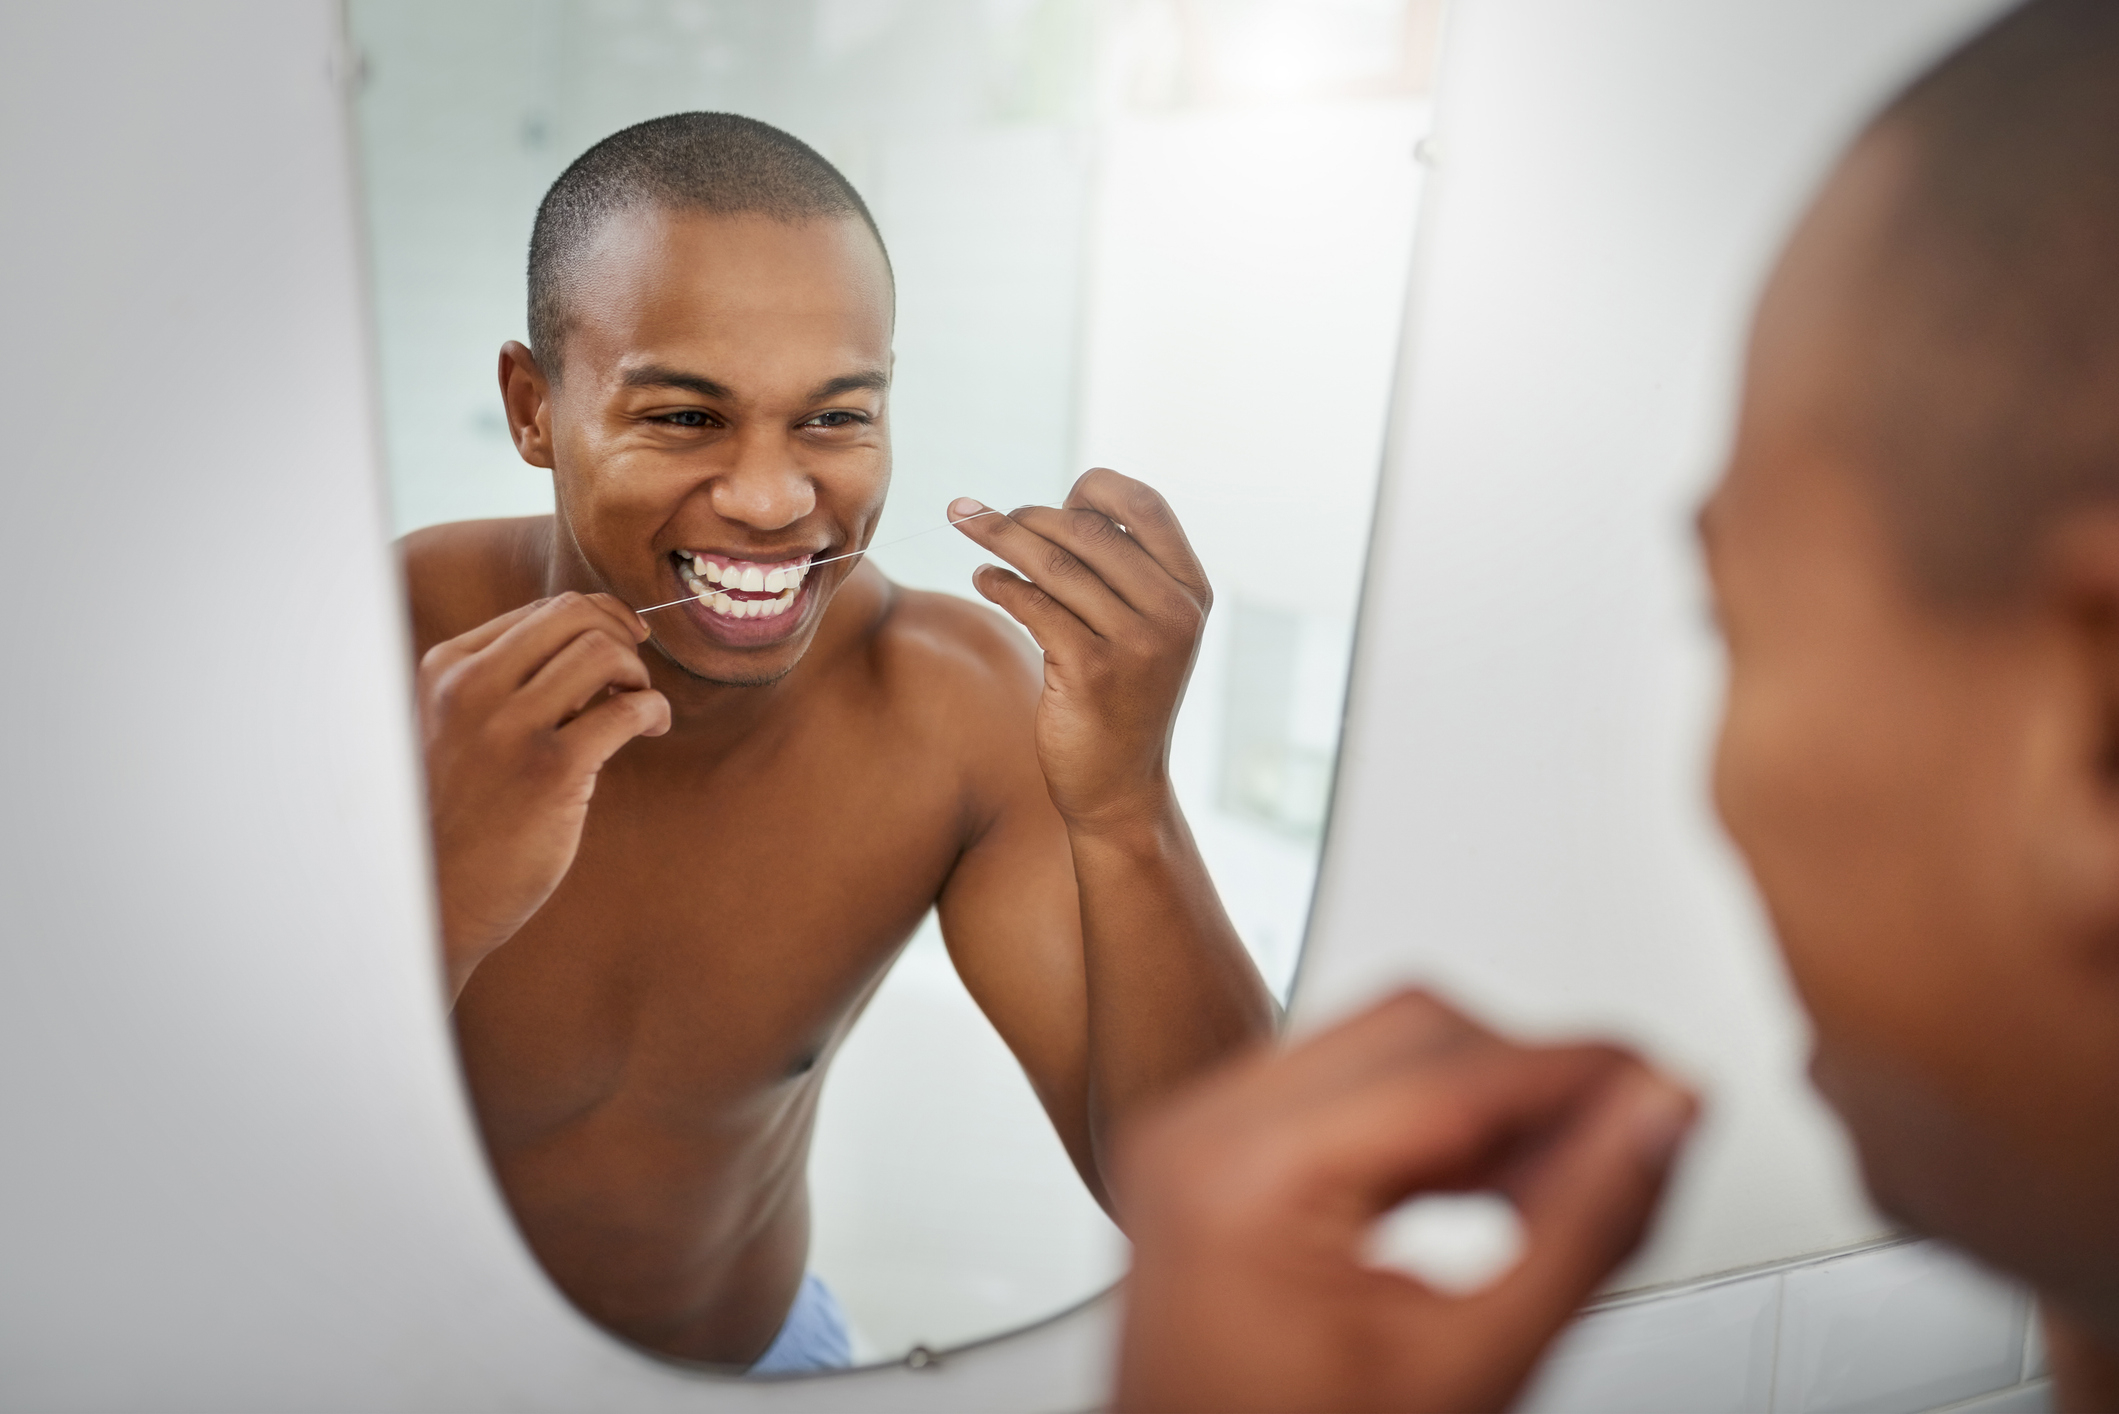 Person flossing teeth while smiling at mirror, promoting dental hygiene